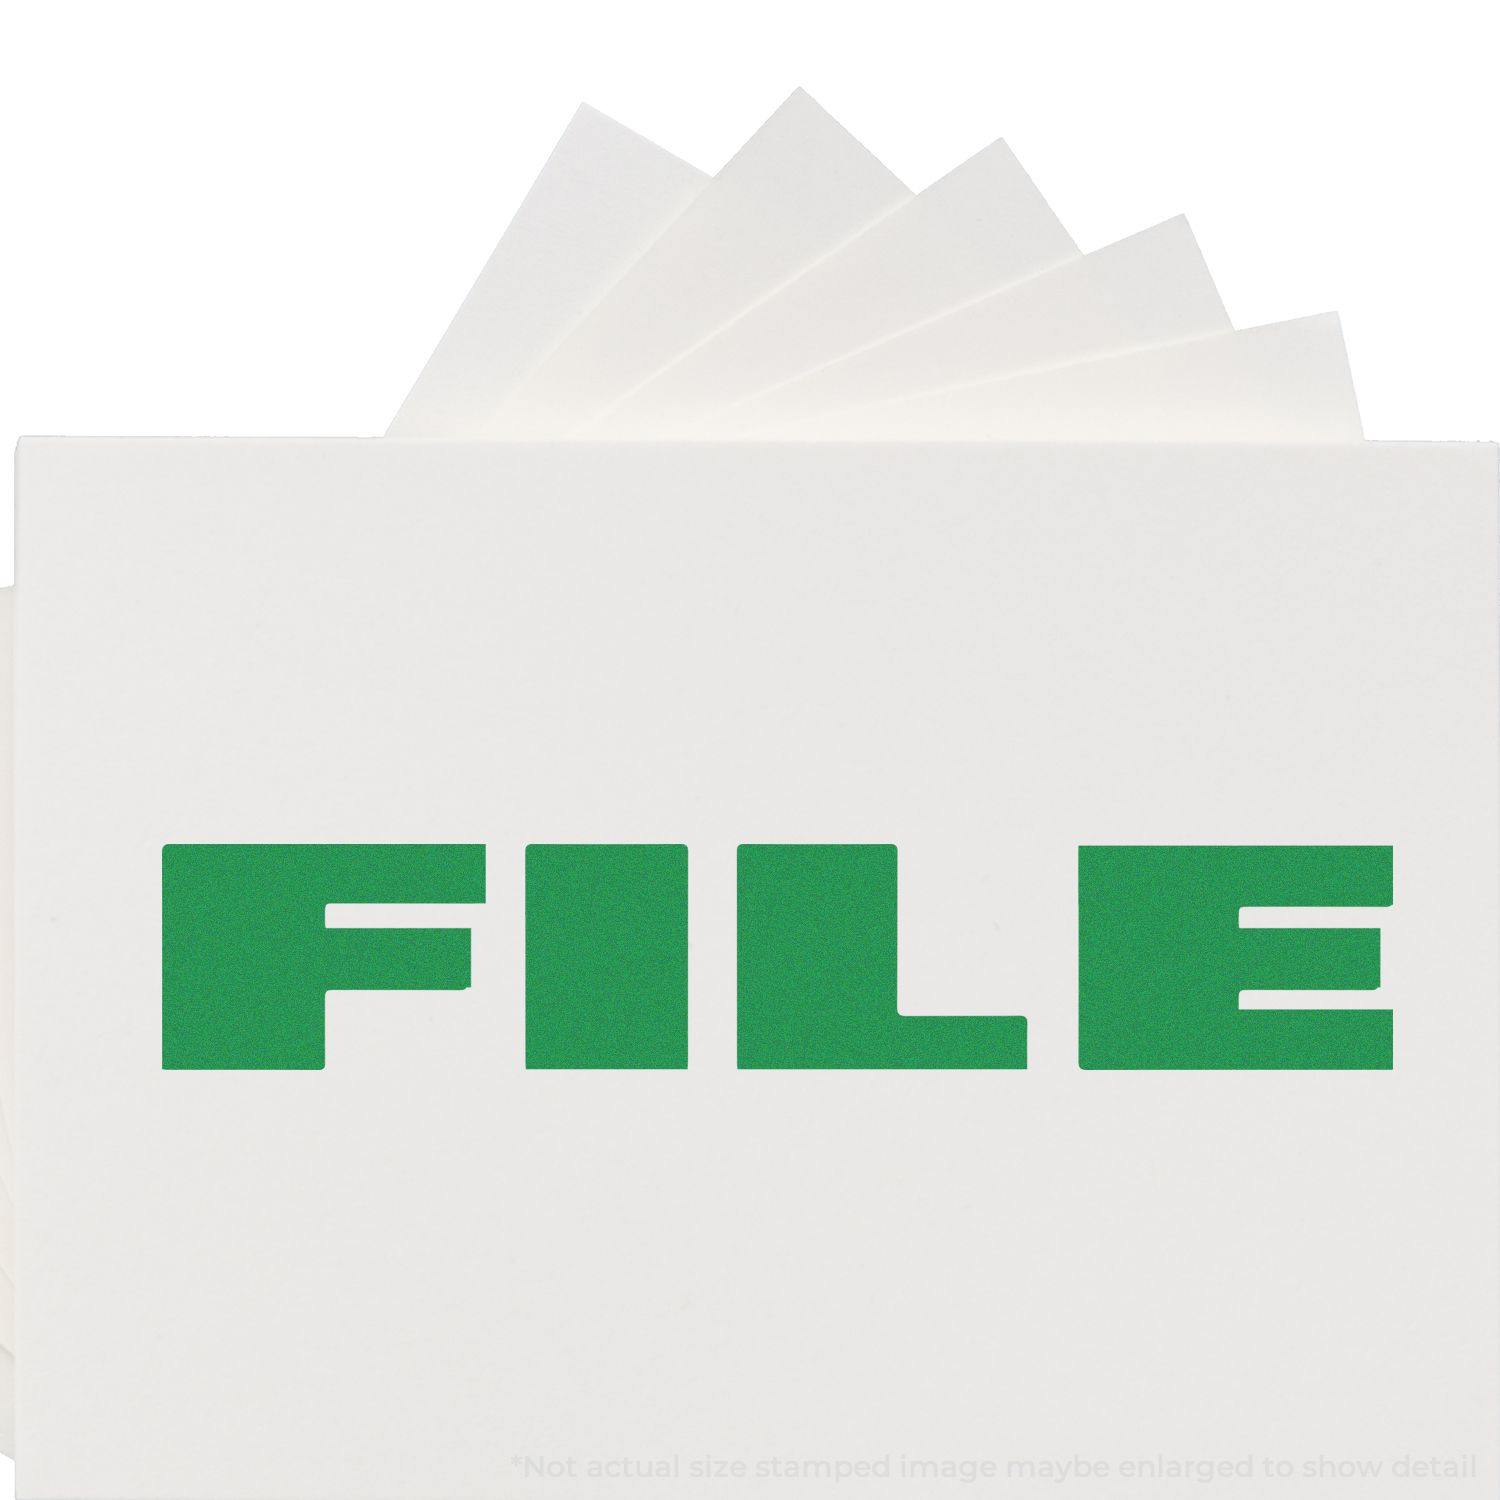 A self-inking stamp with a stamped image showing how the text "FILE" in bold font is displayed after stamping.